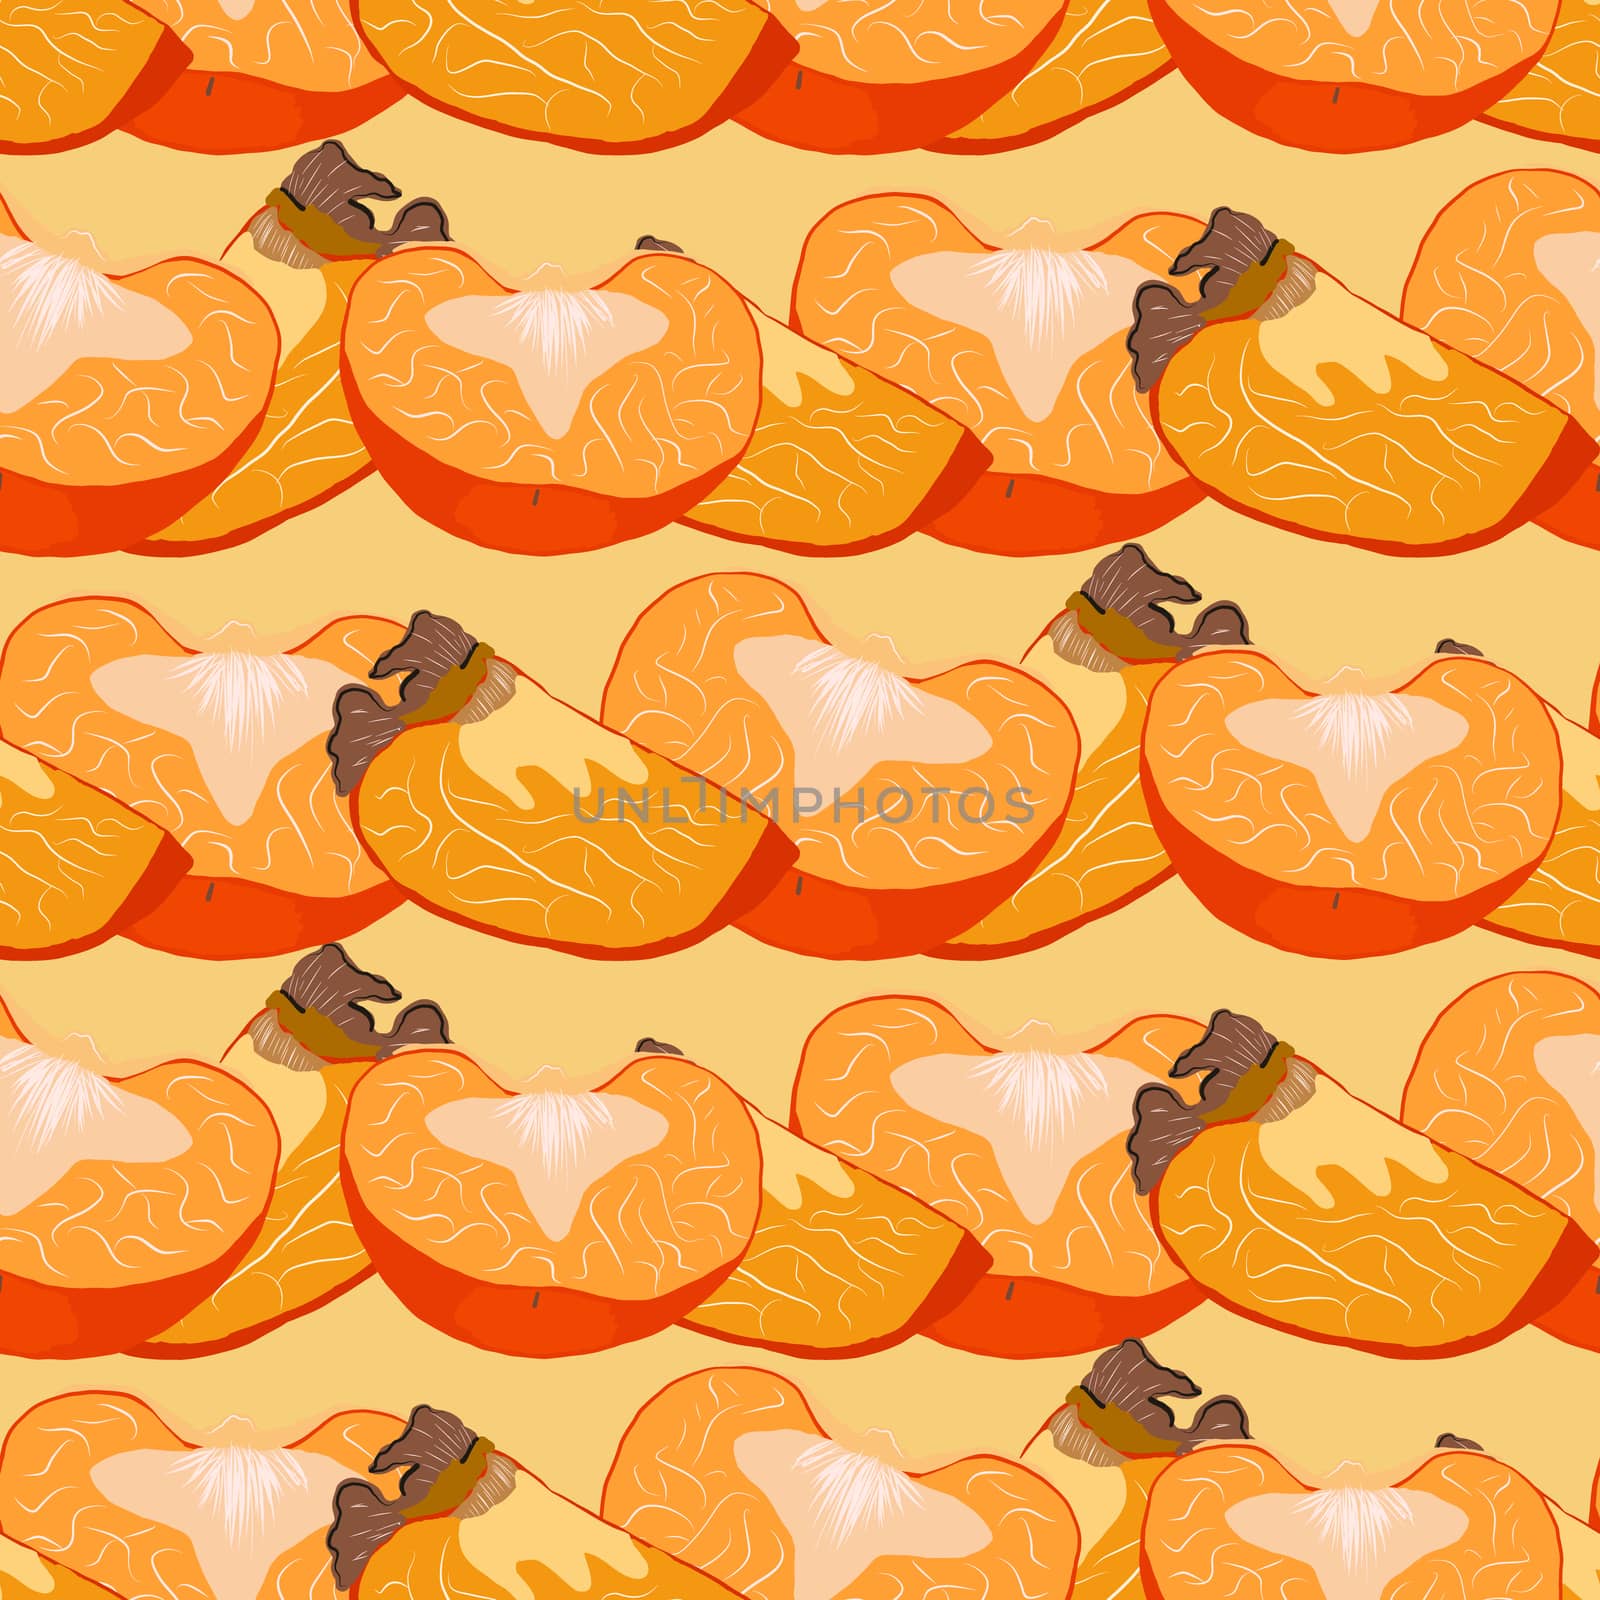 Persimmon whole and cut seamless pattern on a yellow background. Juicy fruit endless pattern vector illustration, design for wallpapers, fabrics, textiles, packaging.